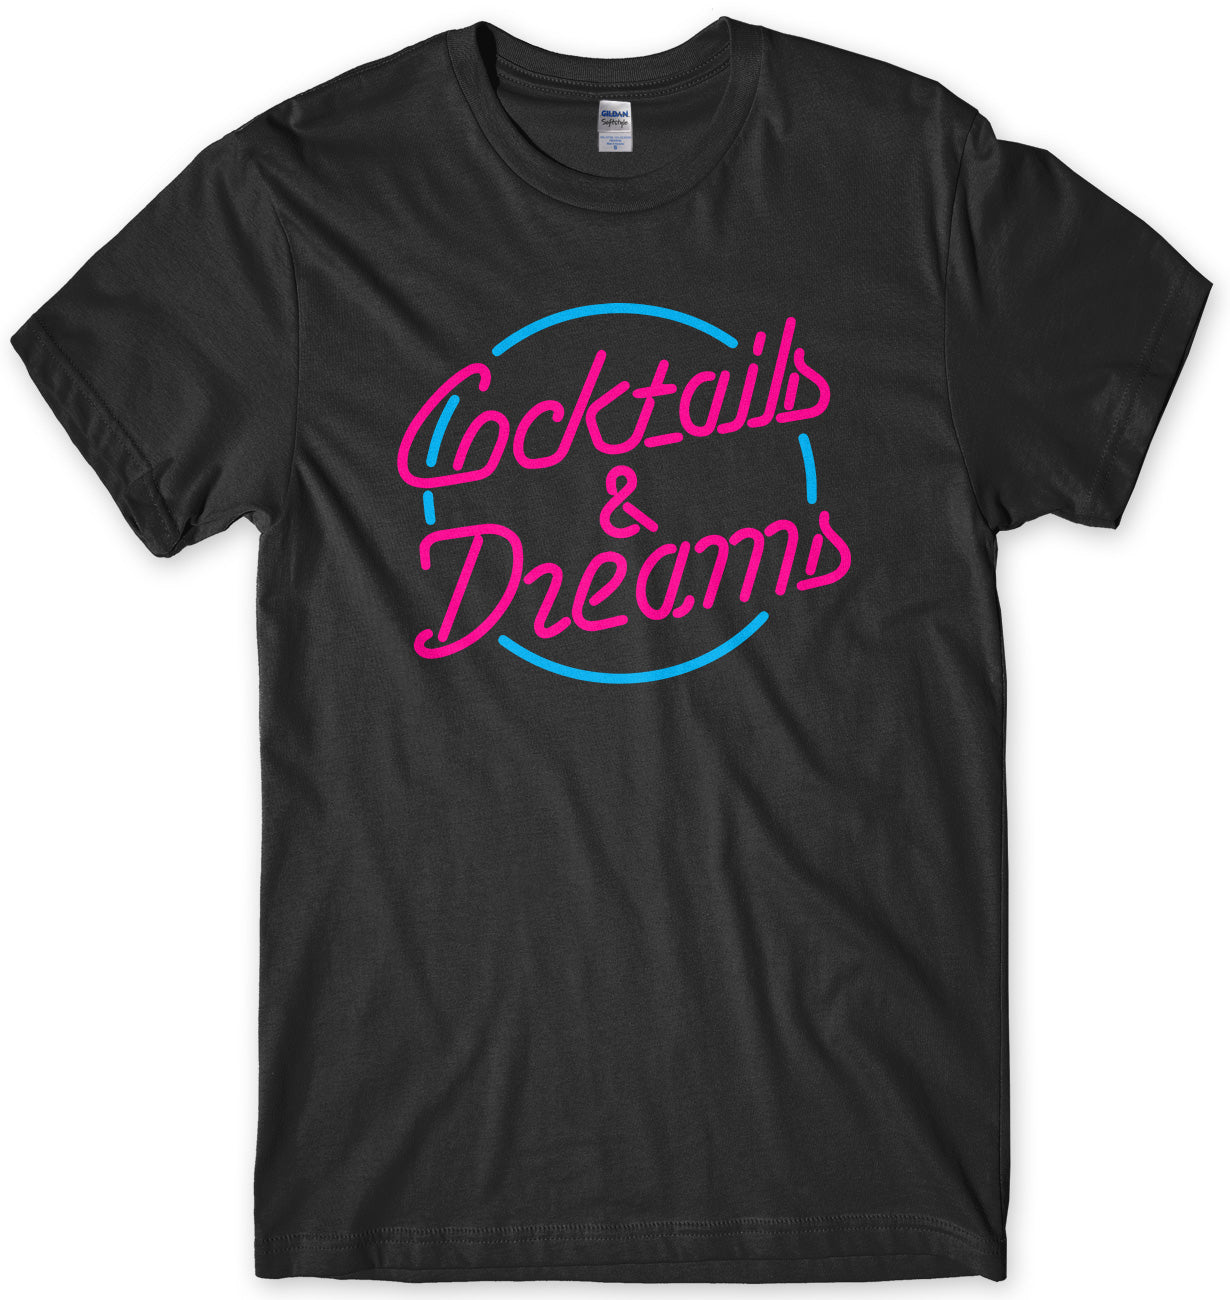 COCKTAILS & DREAMS INSPIRED BY COCKTAIL MENS UNISEX T-SHIRT